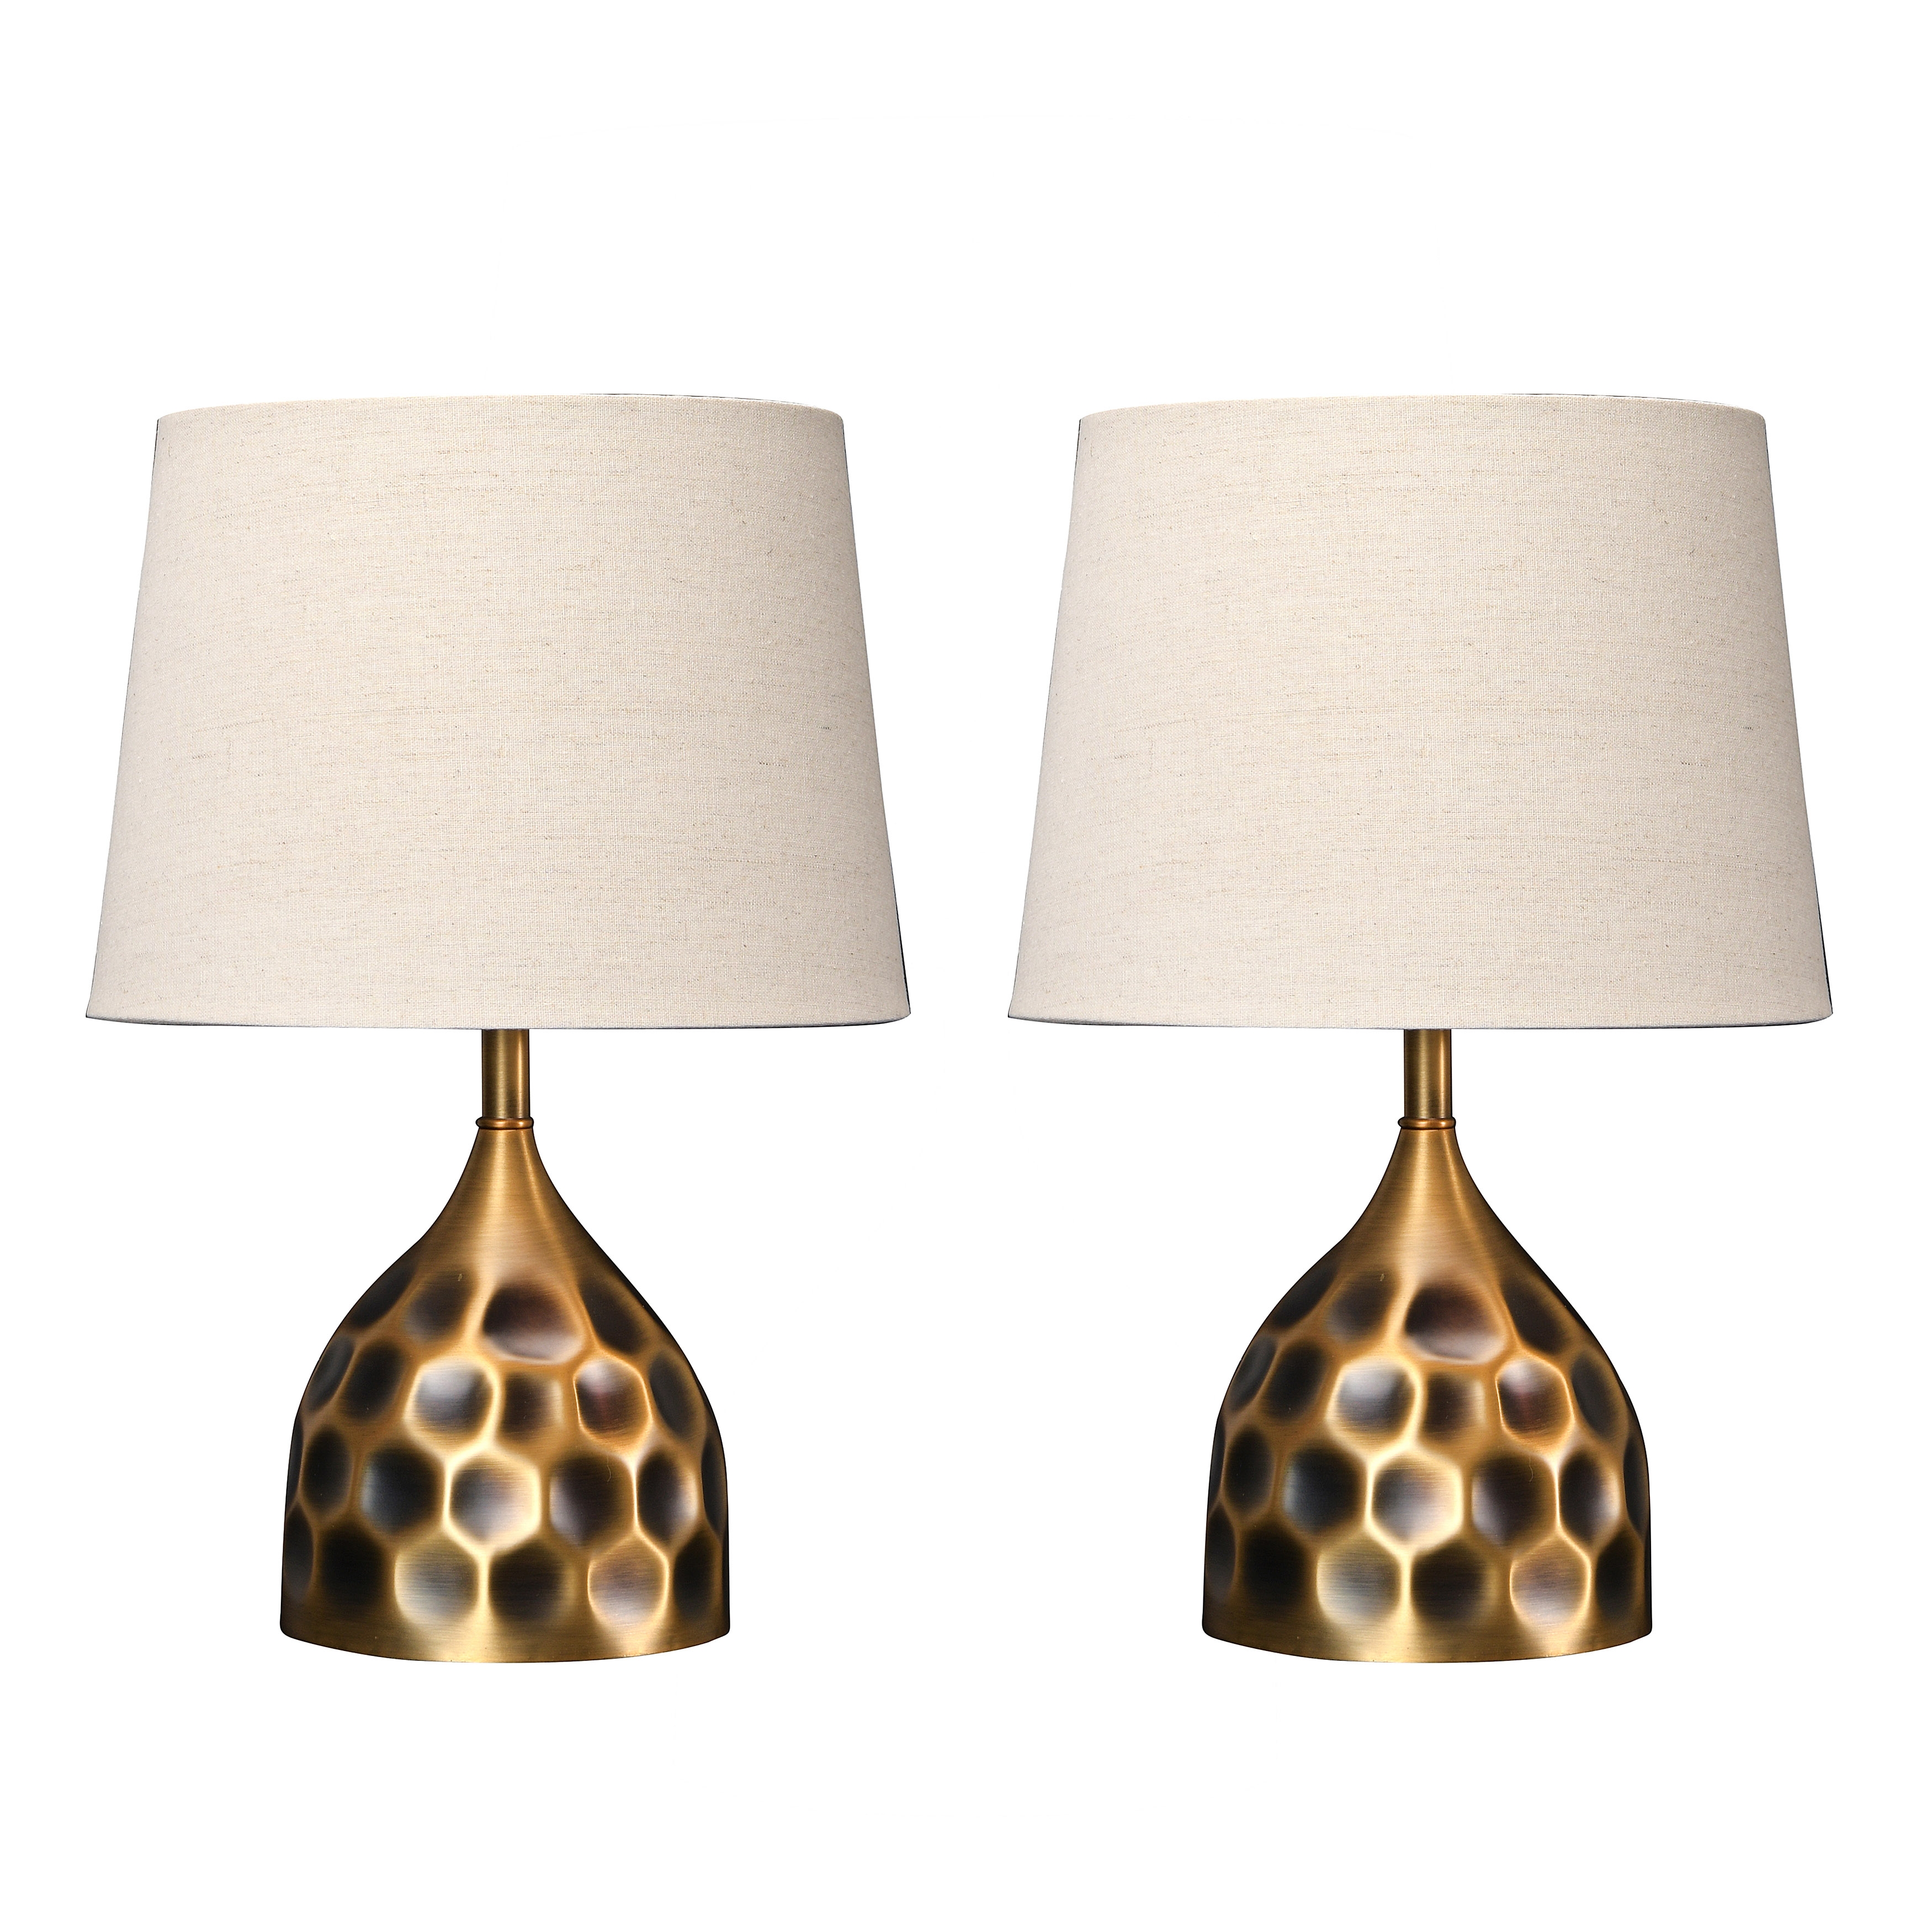 19" Hammered Brass Table Lamps, Set of 2 - Image 0